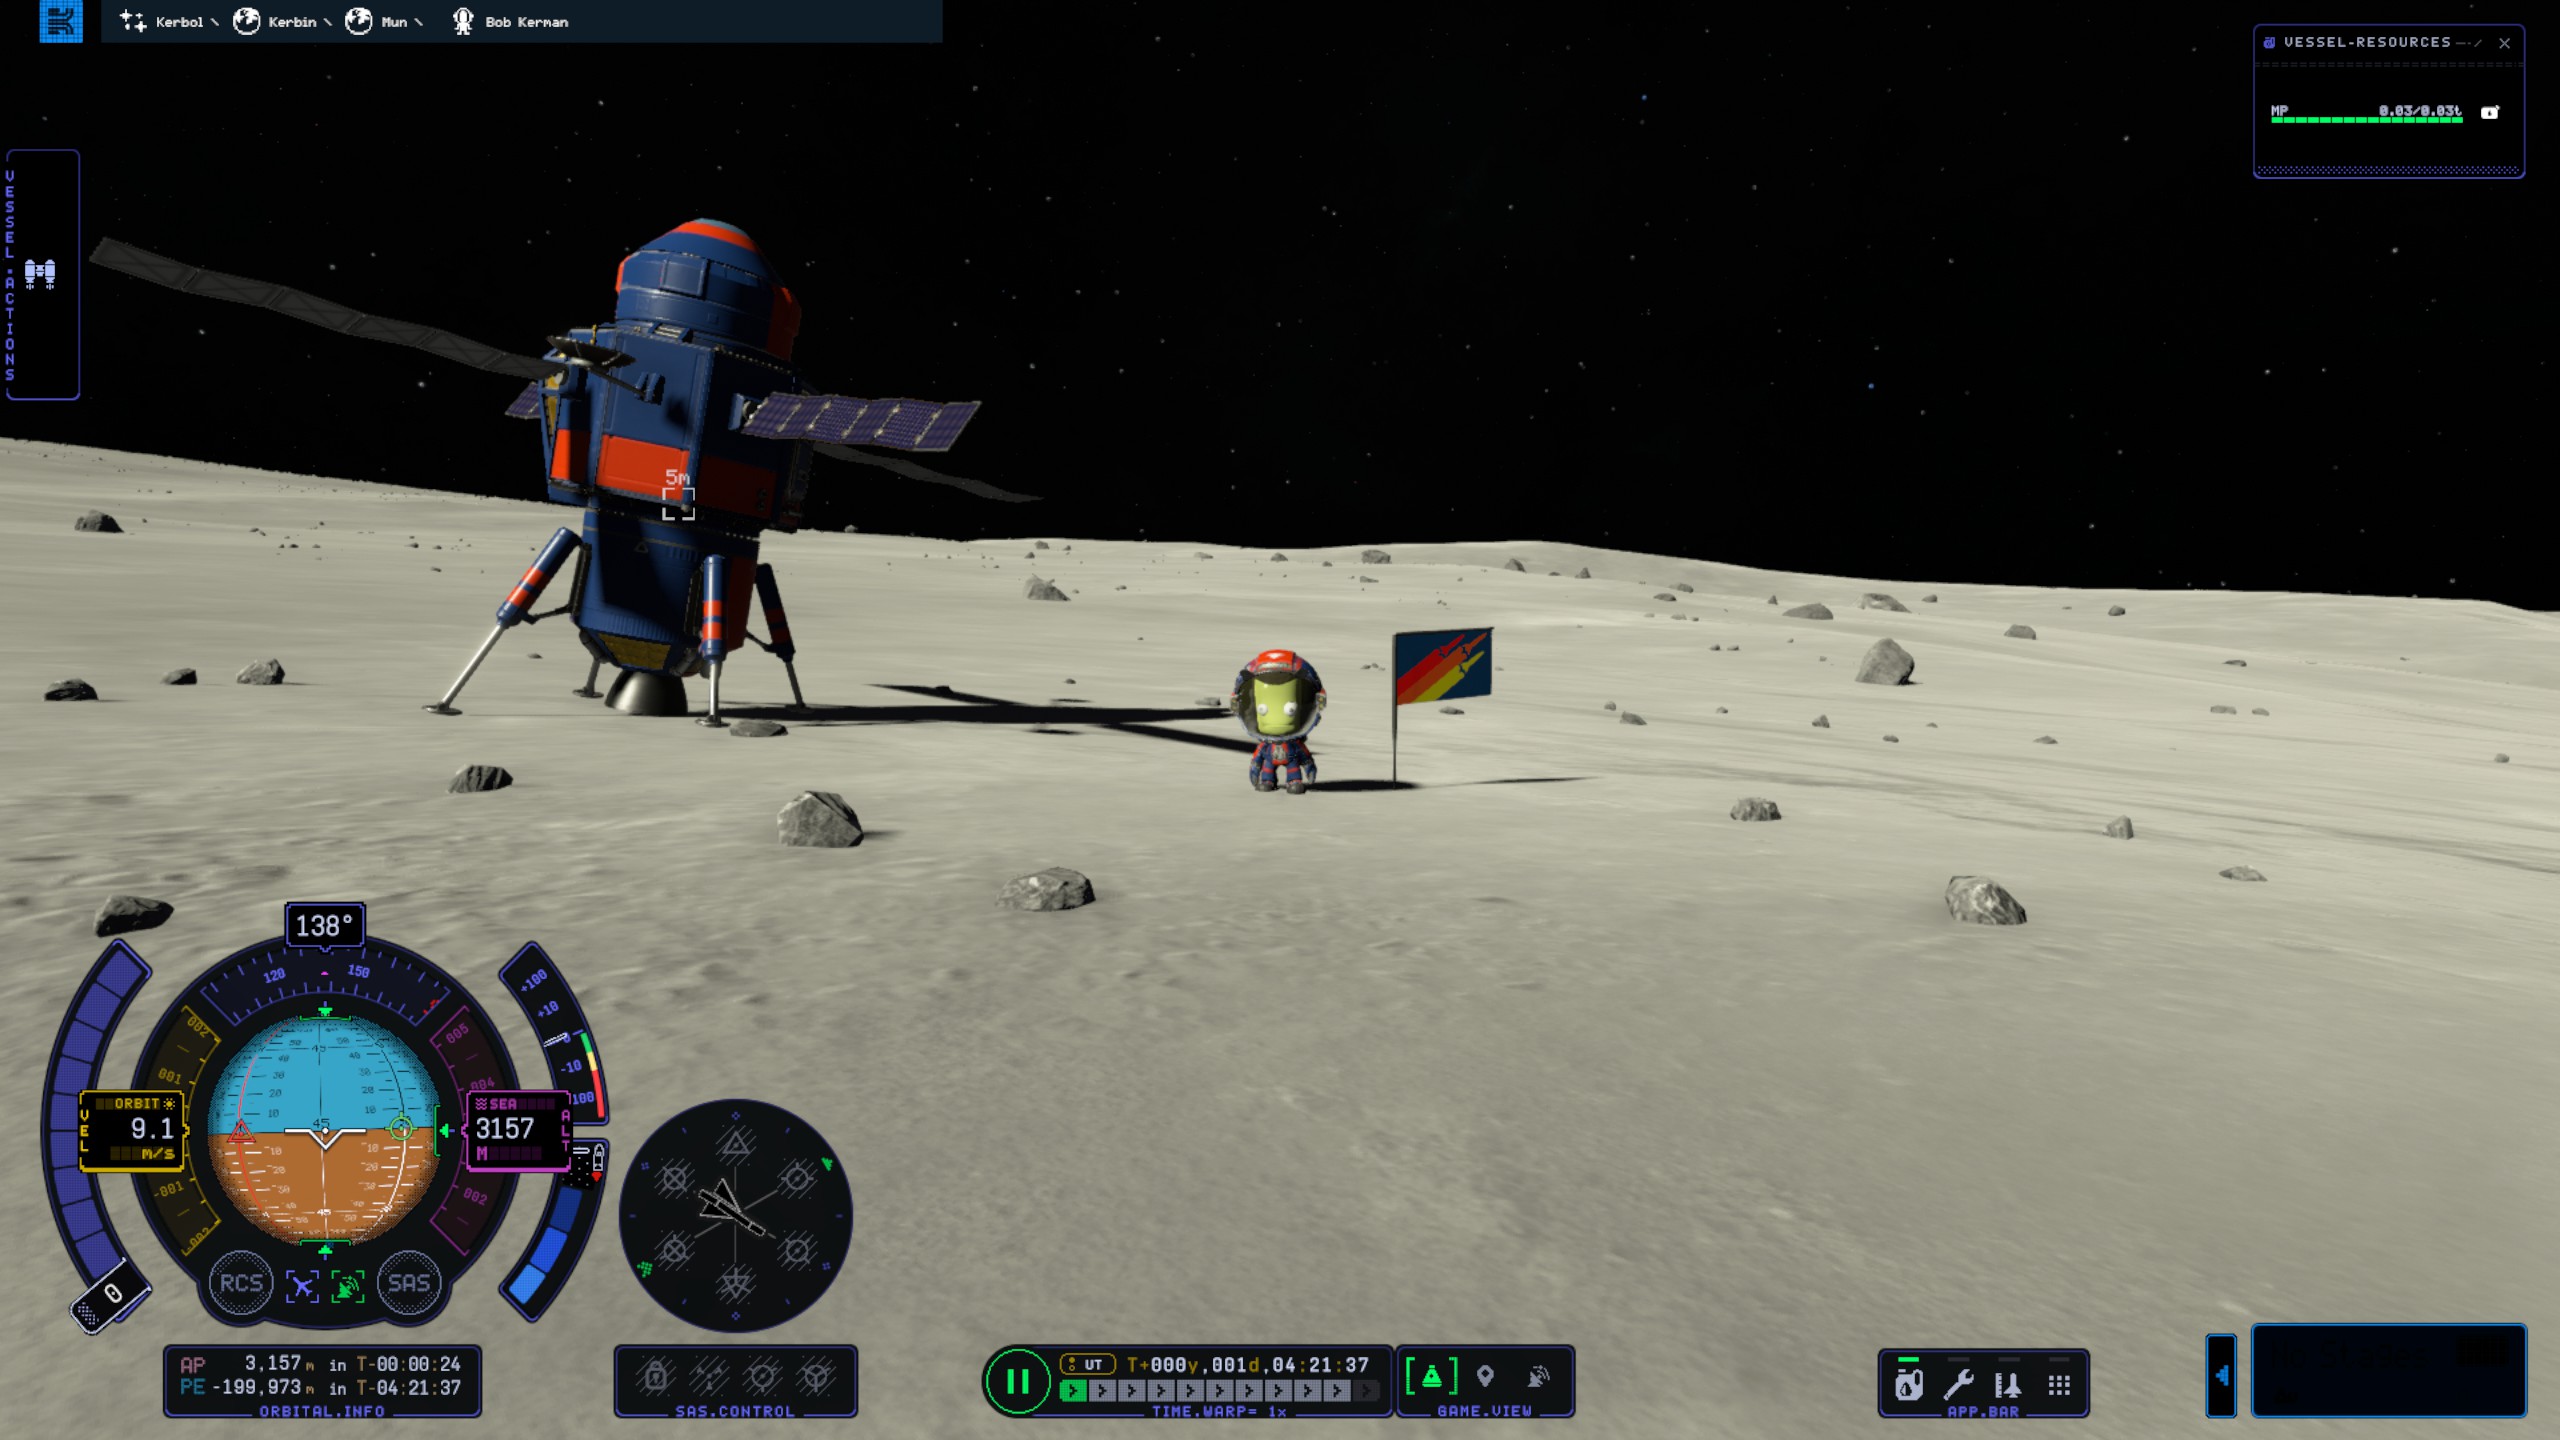 A screenshot of Kerbal Space Program 2. There are elements of the UI for launching and tracking the spaceship. The main image is a small green figure in a space suit standing next to a flag on the surface of the Mun (which looks shockingly like the moon). The Kerbal's lander is to the left of him, tilting slightly.